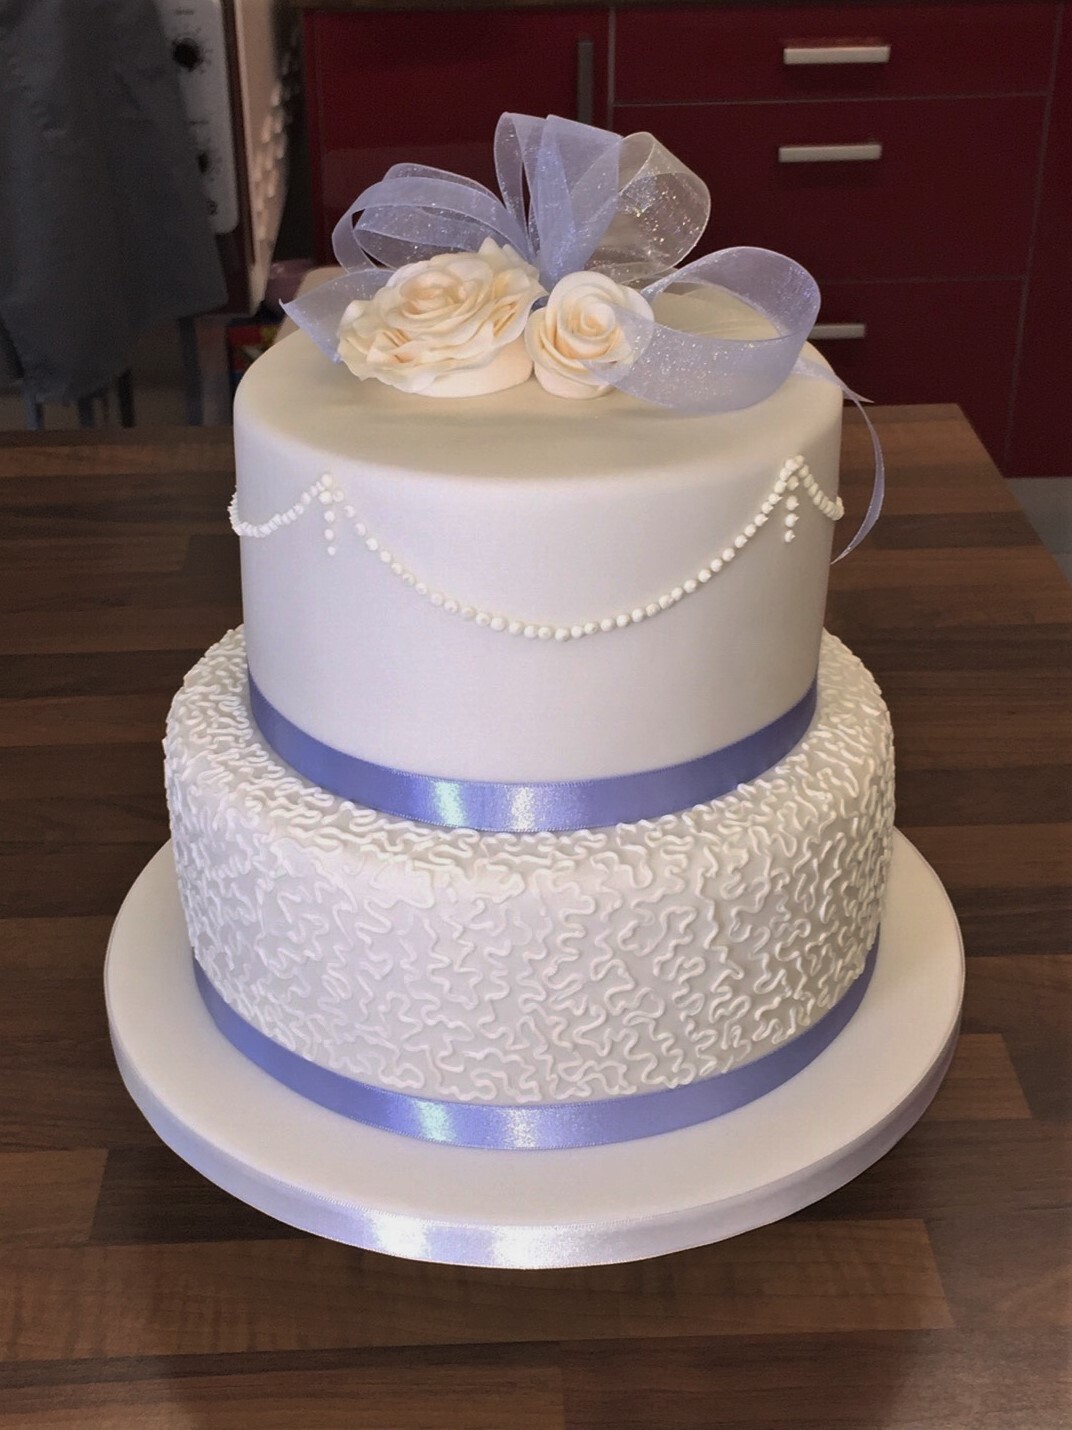 Gretna Wedding Cake- Piped Swags and Filligree Piping